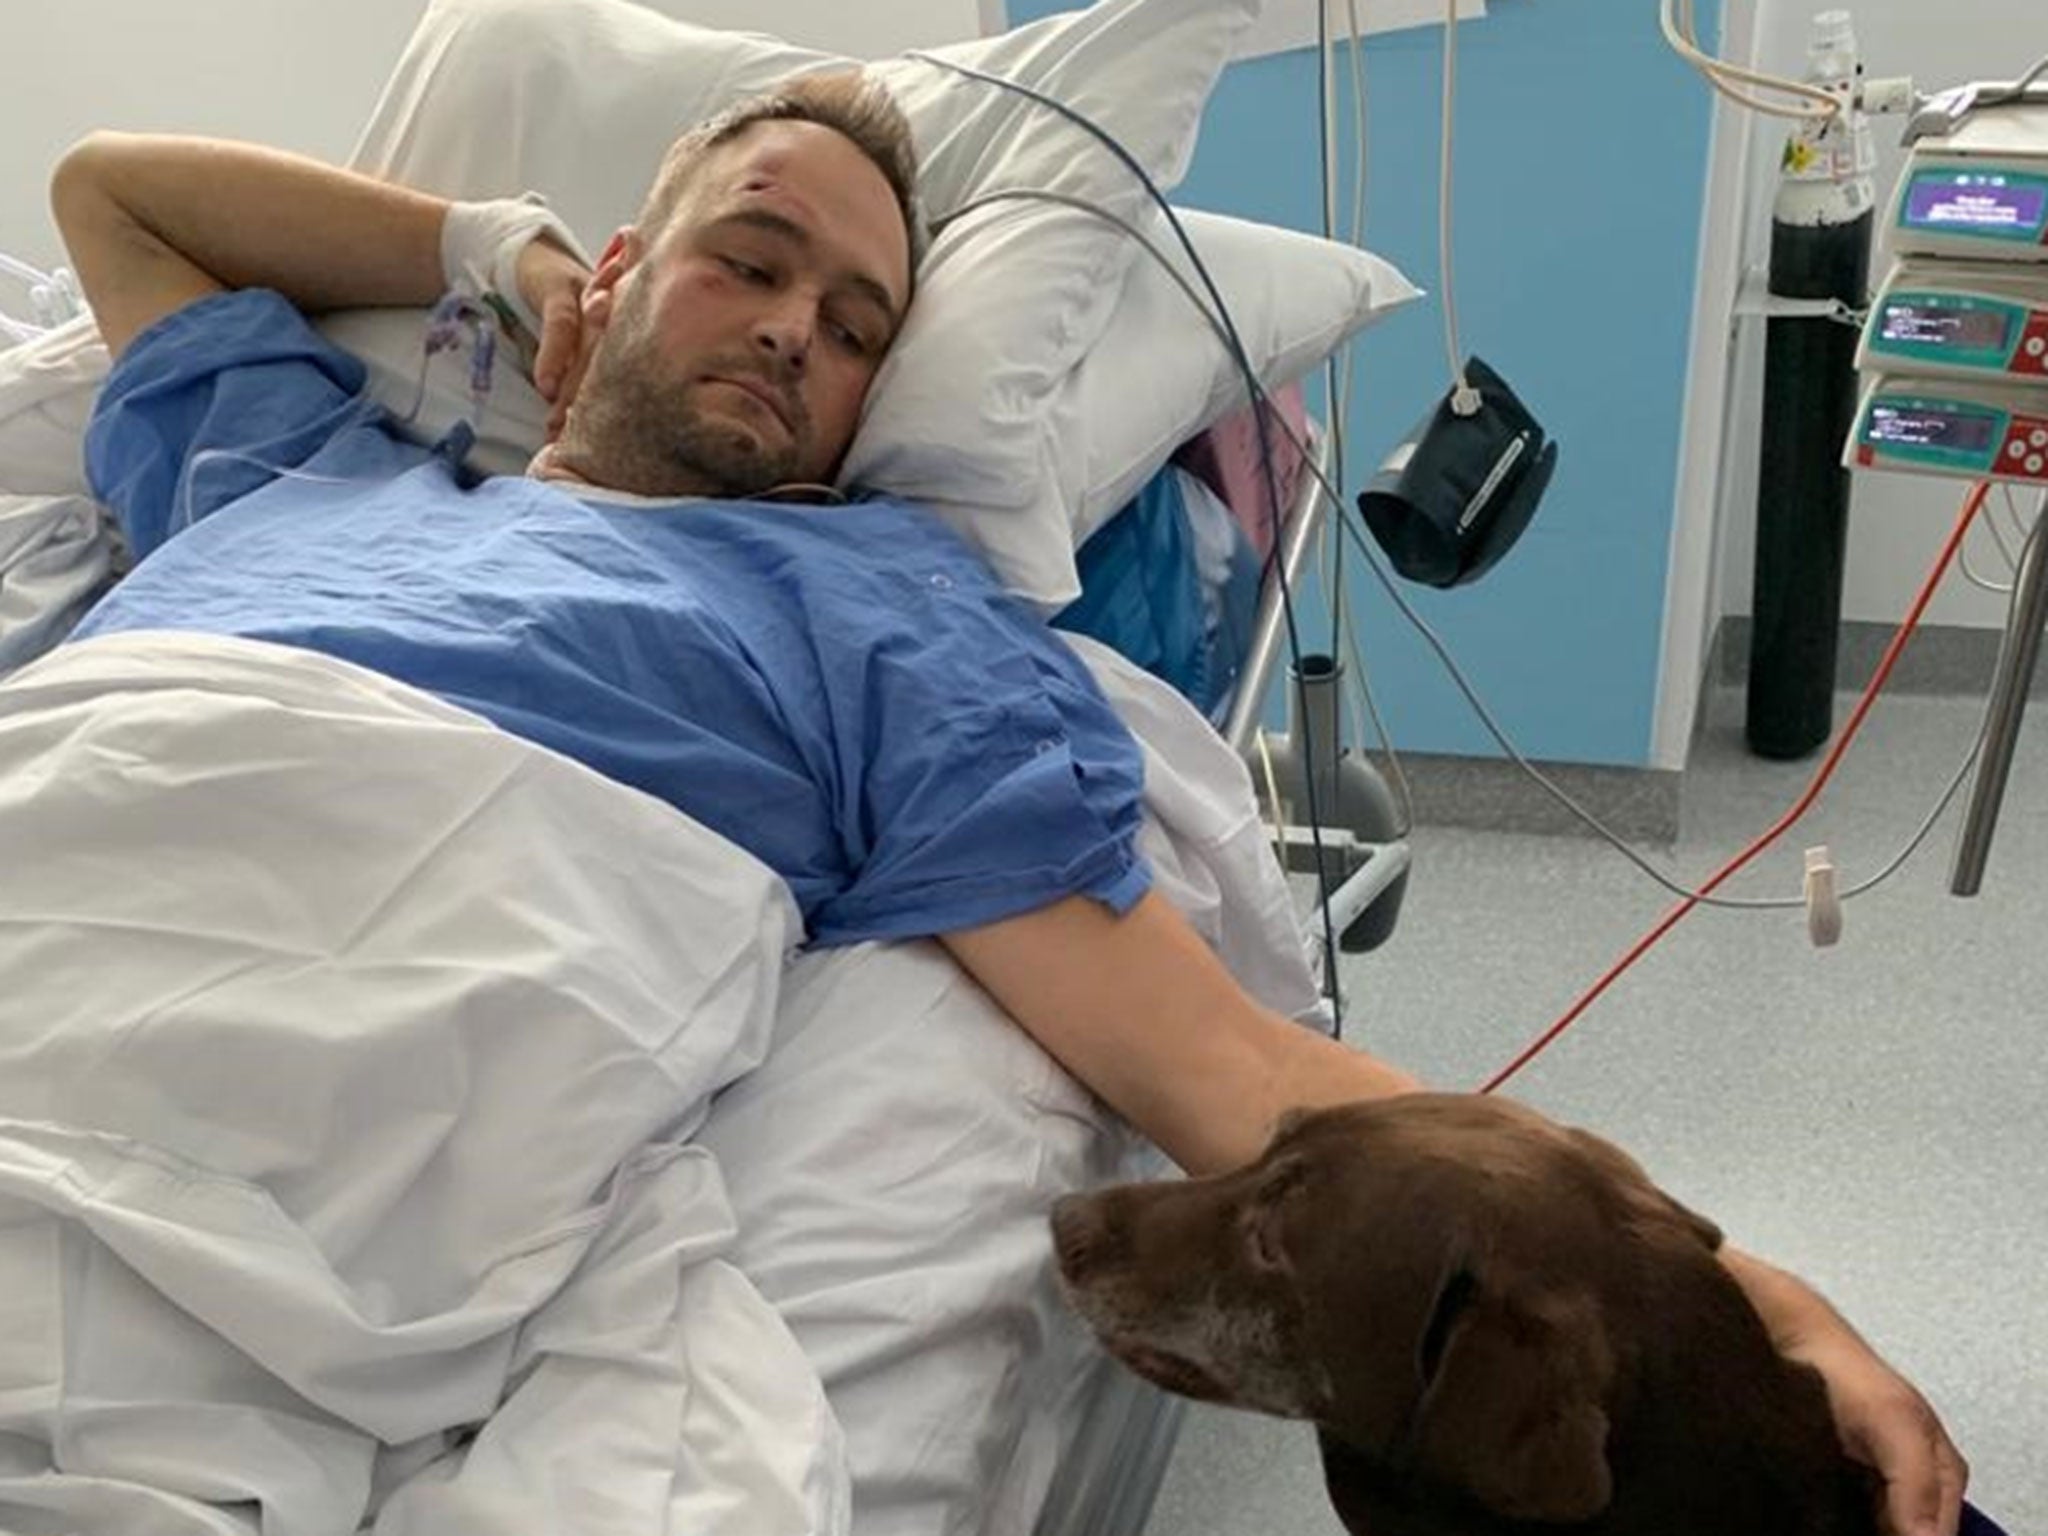 PC Gareth Phillips with his dog in hospital, where he underwent several rounds of surgery